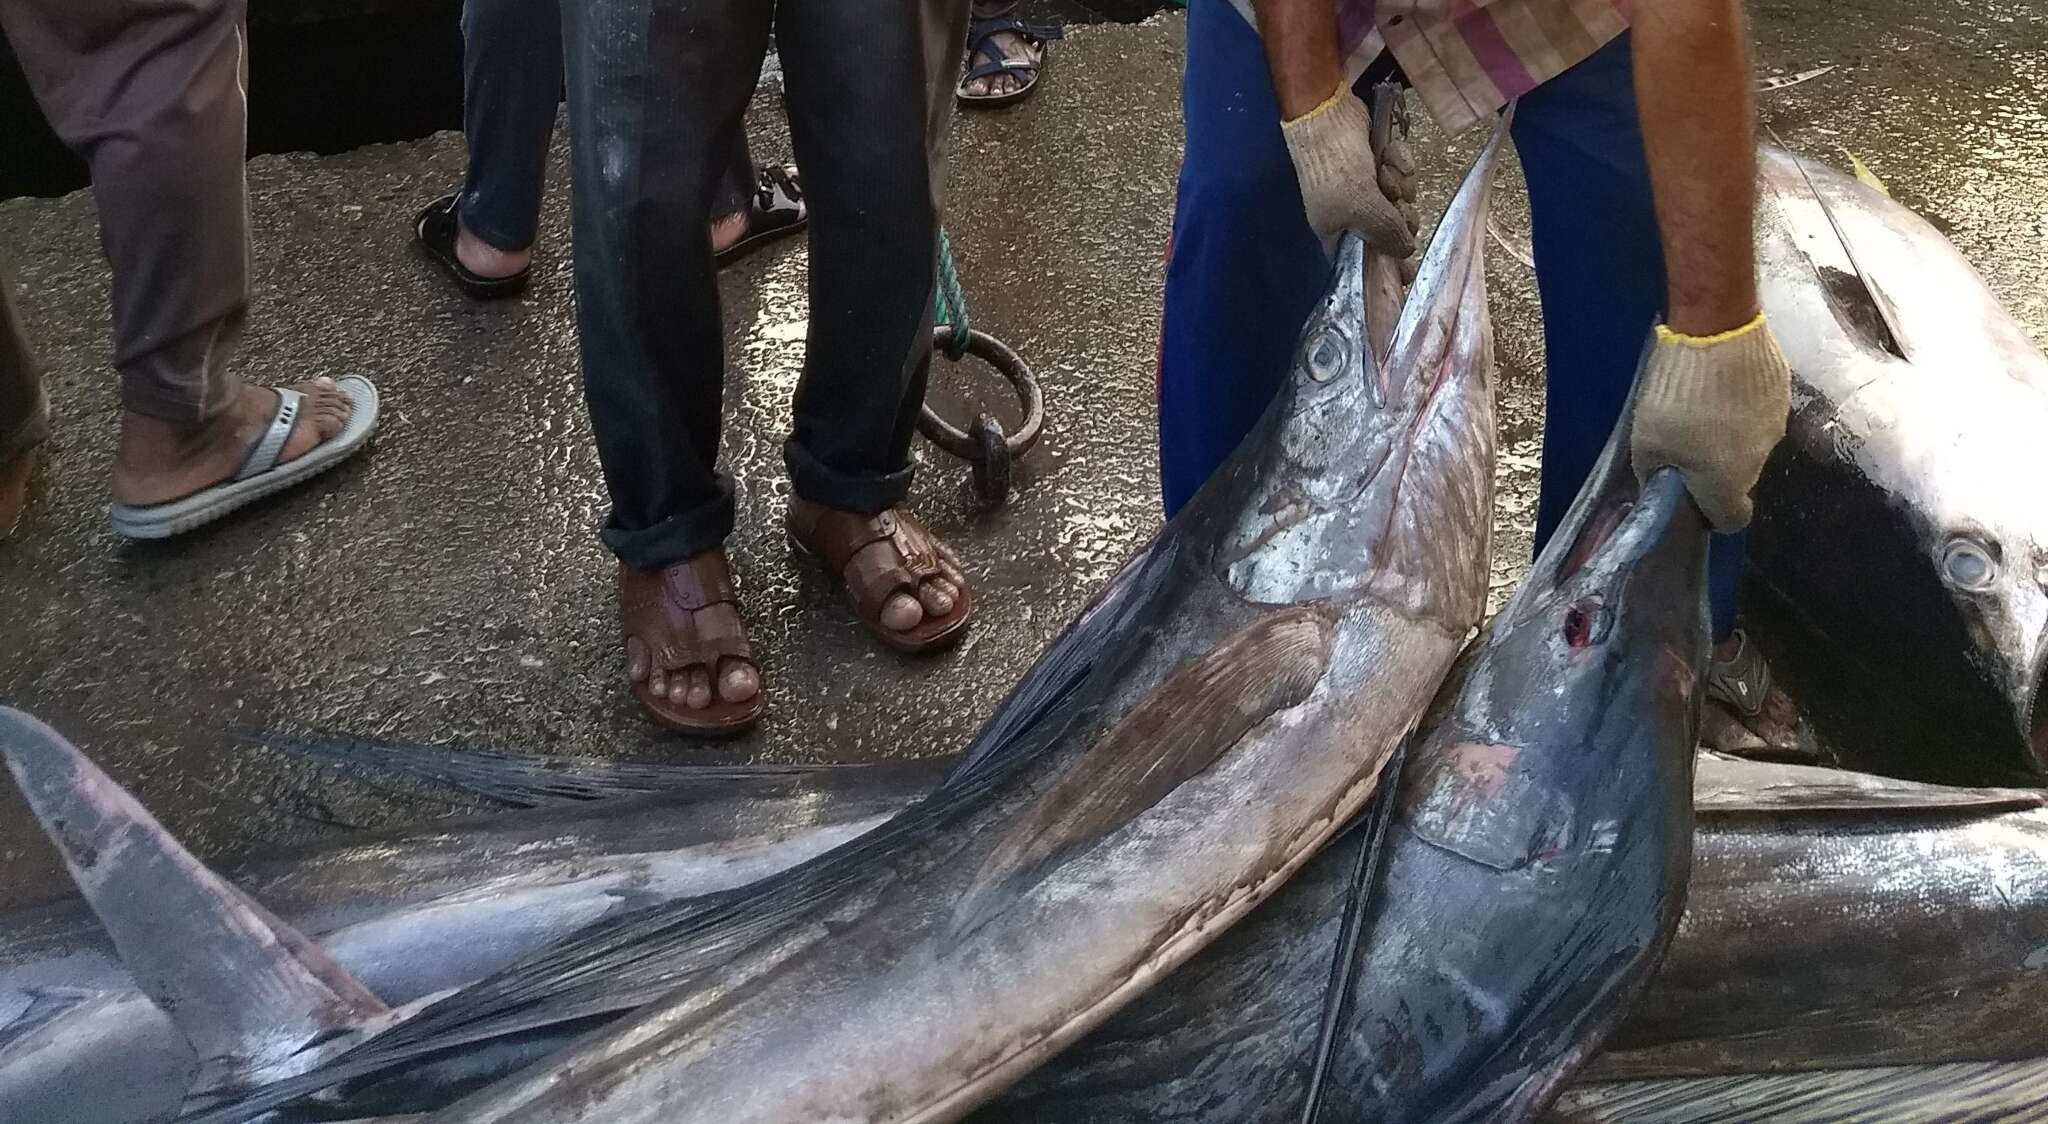 Image of billfishes